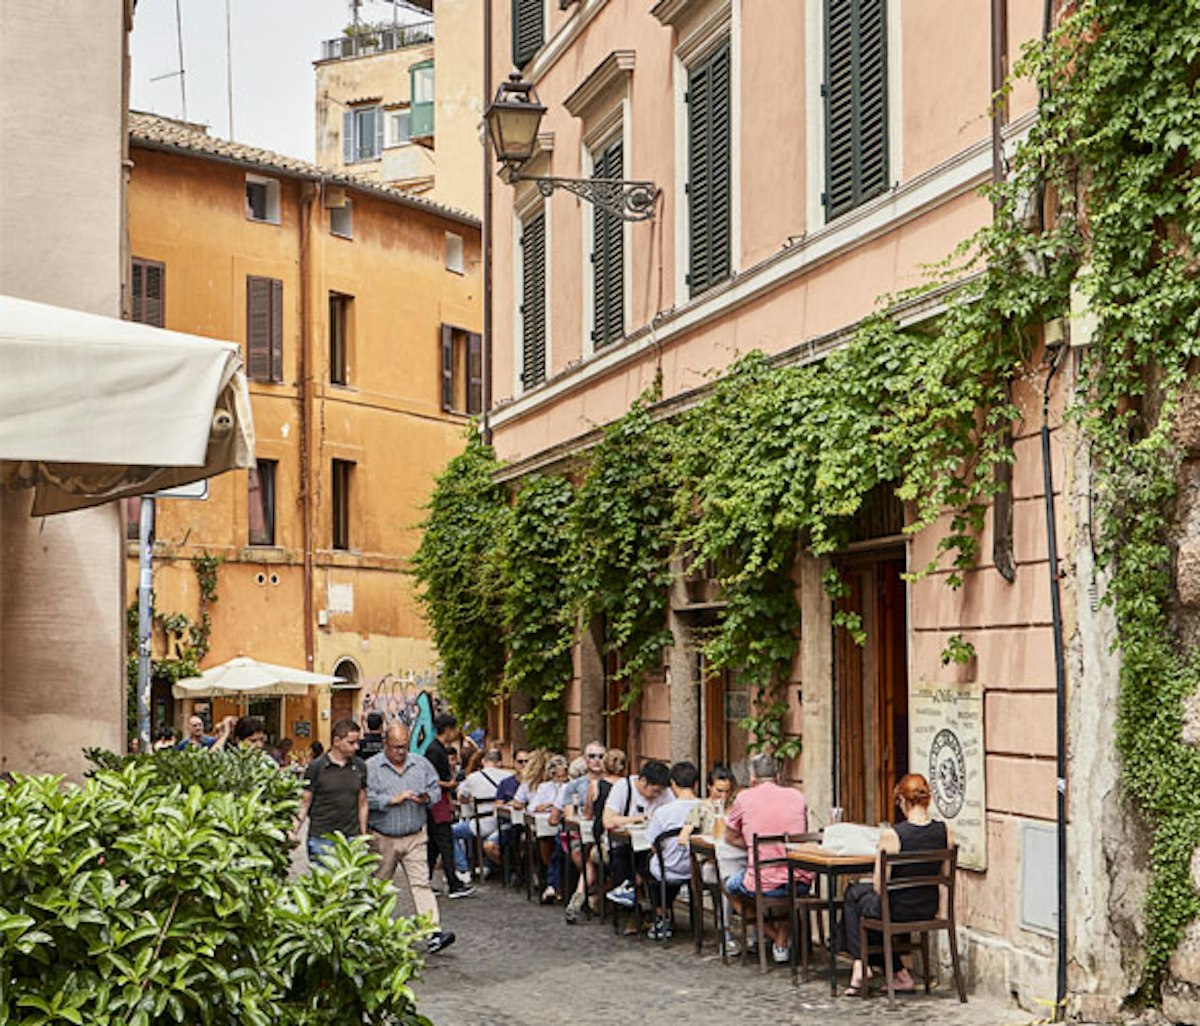 People are sitting at tables in a narrow alley in rome, italy.